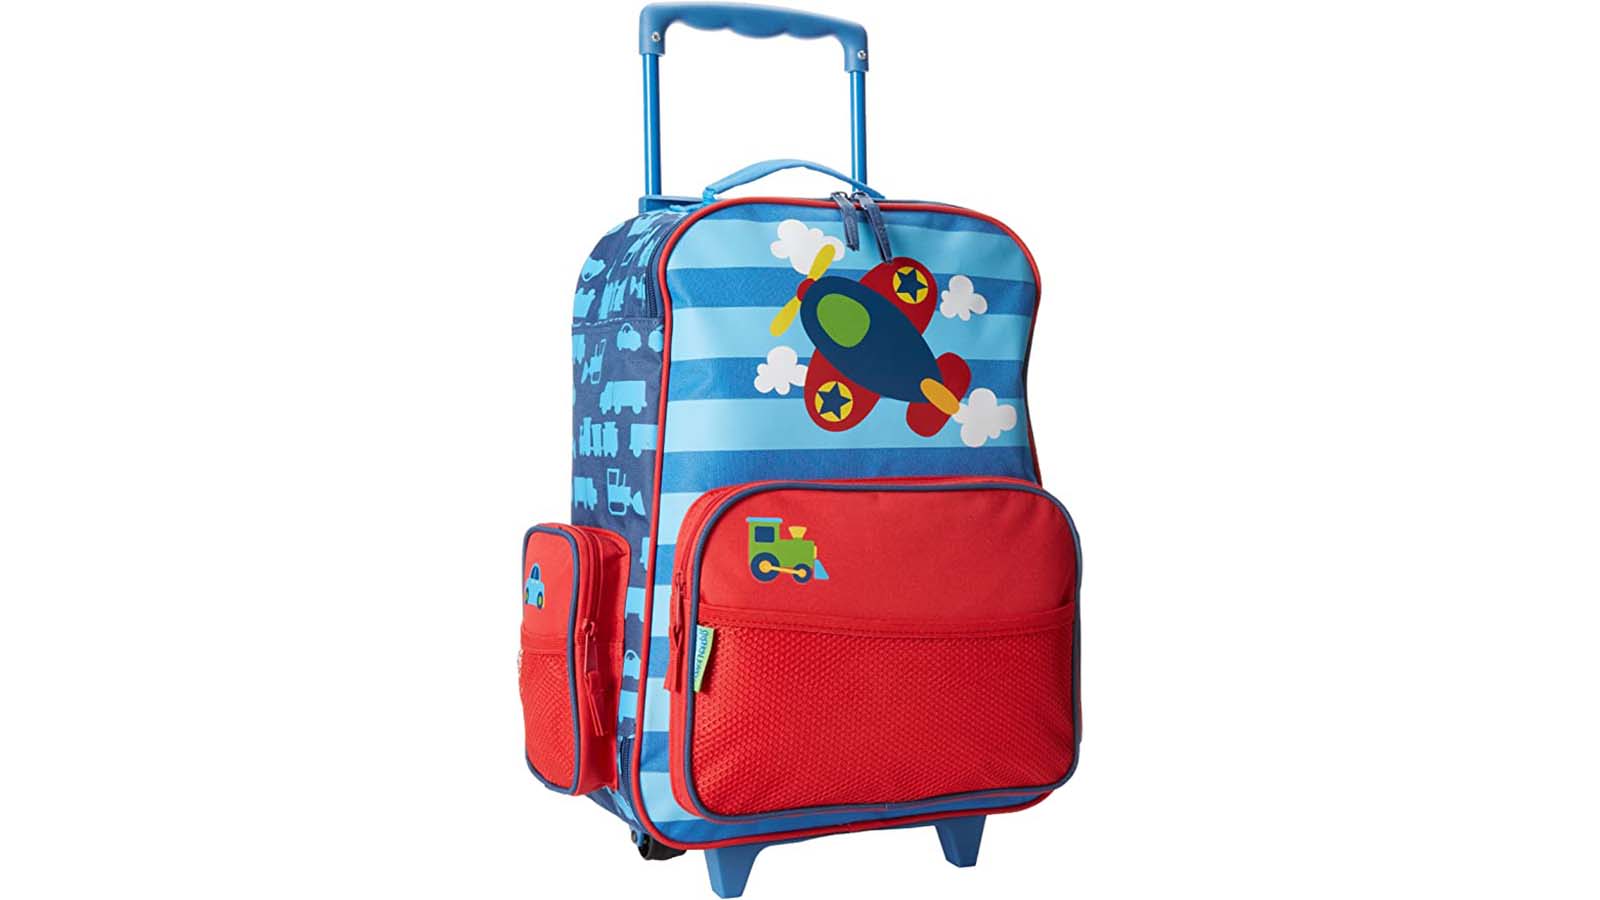 The Best Kids Luggage of 2022, According to Experts